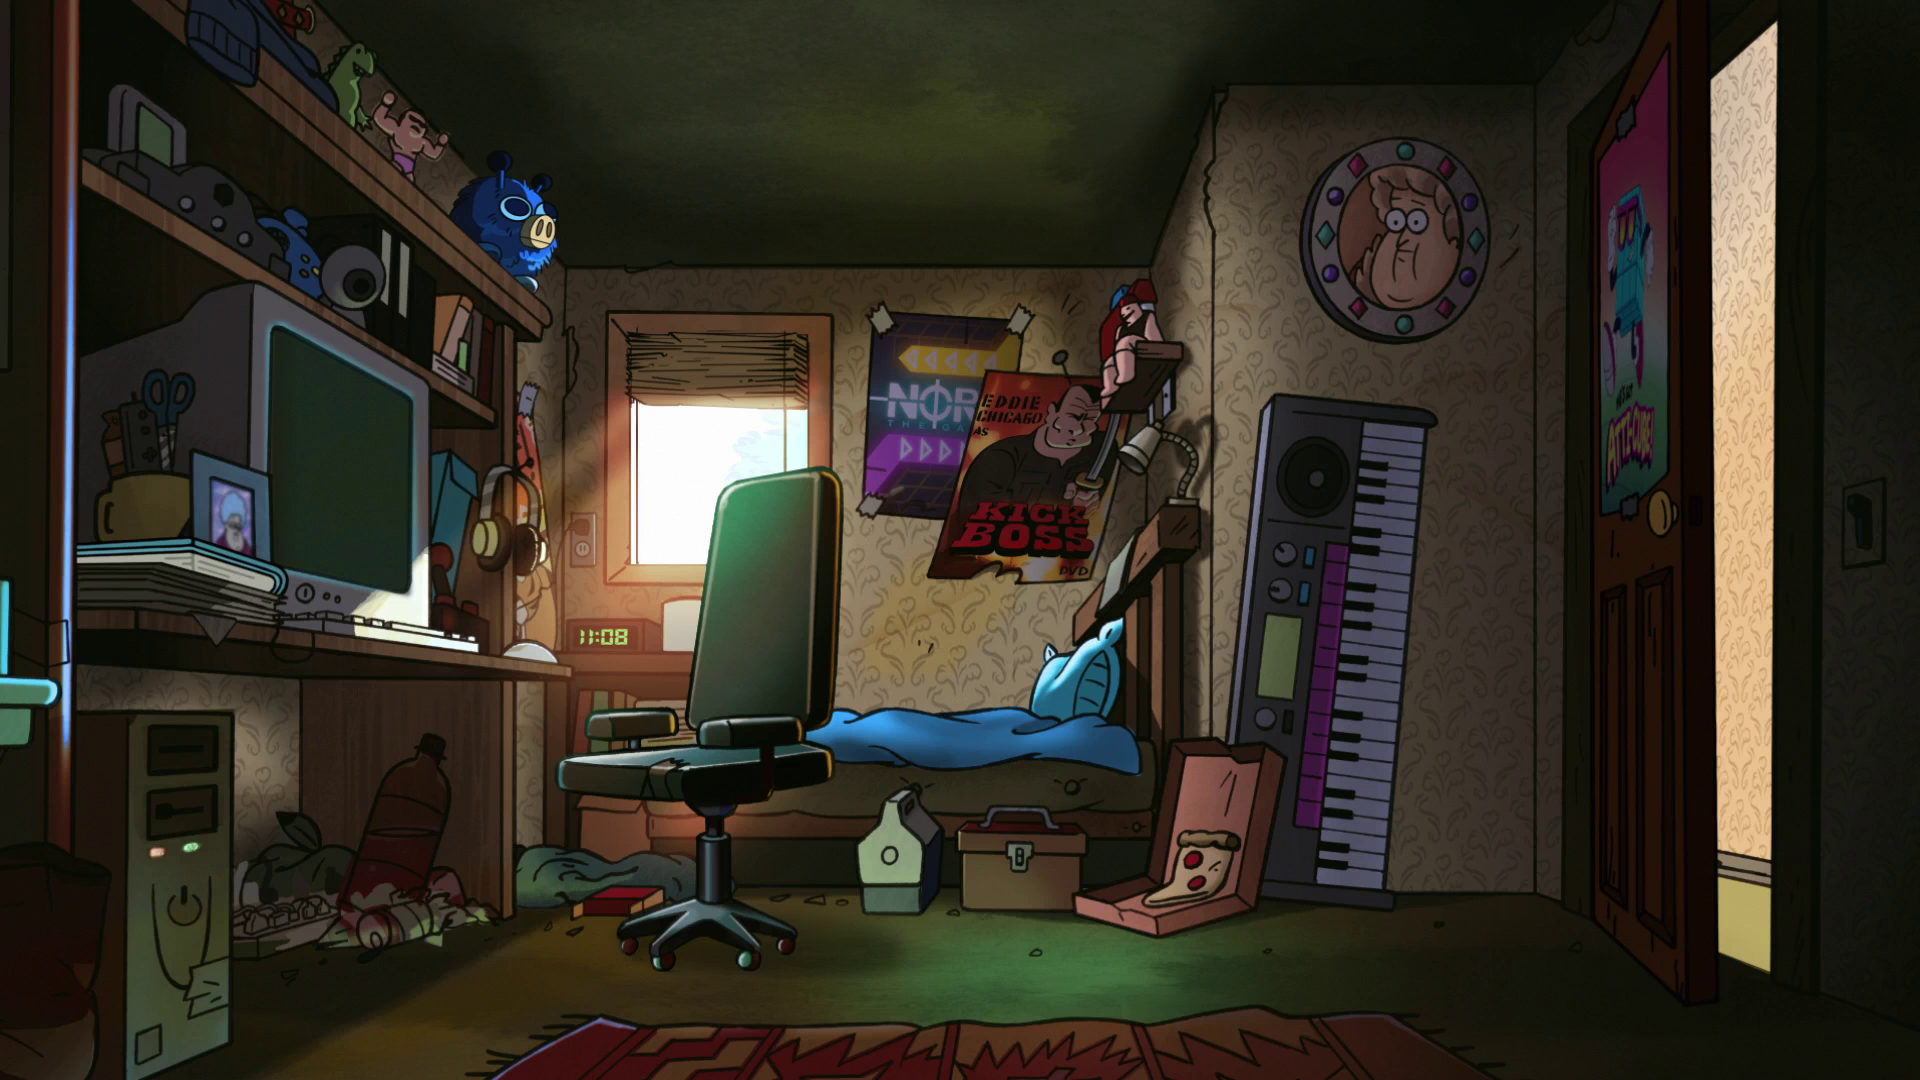 Image S2e5 soos room daytime.png Gravity Falls Wiki FANDOM powered by Wikia...